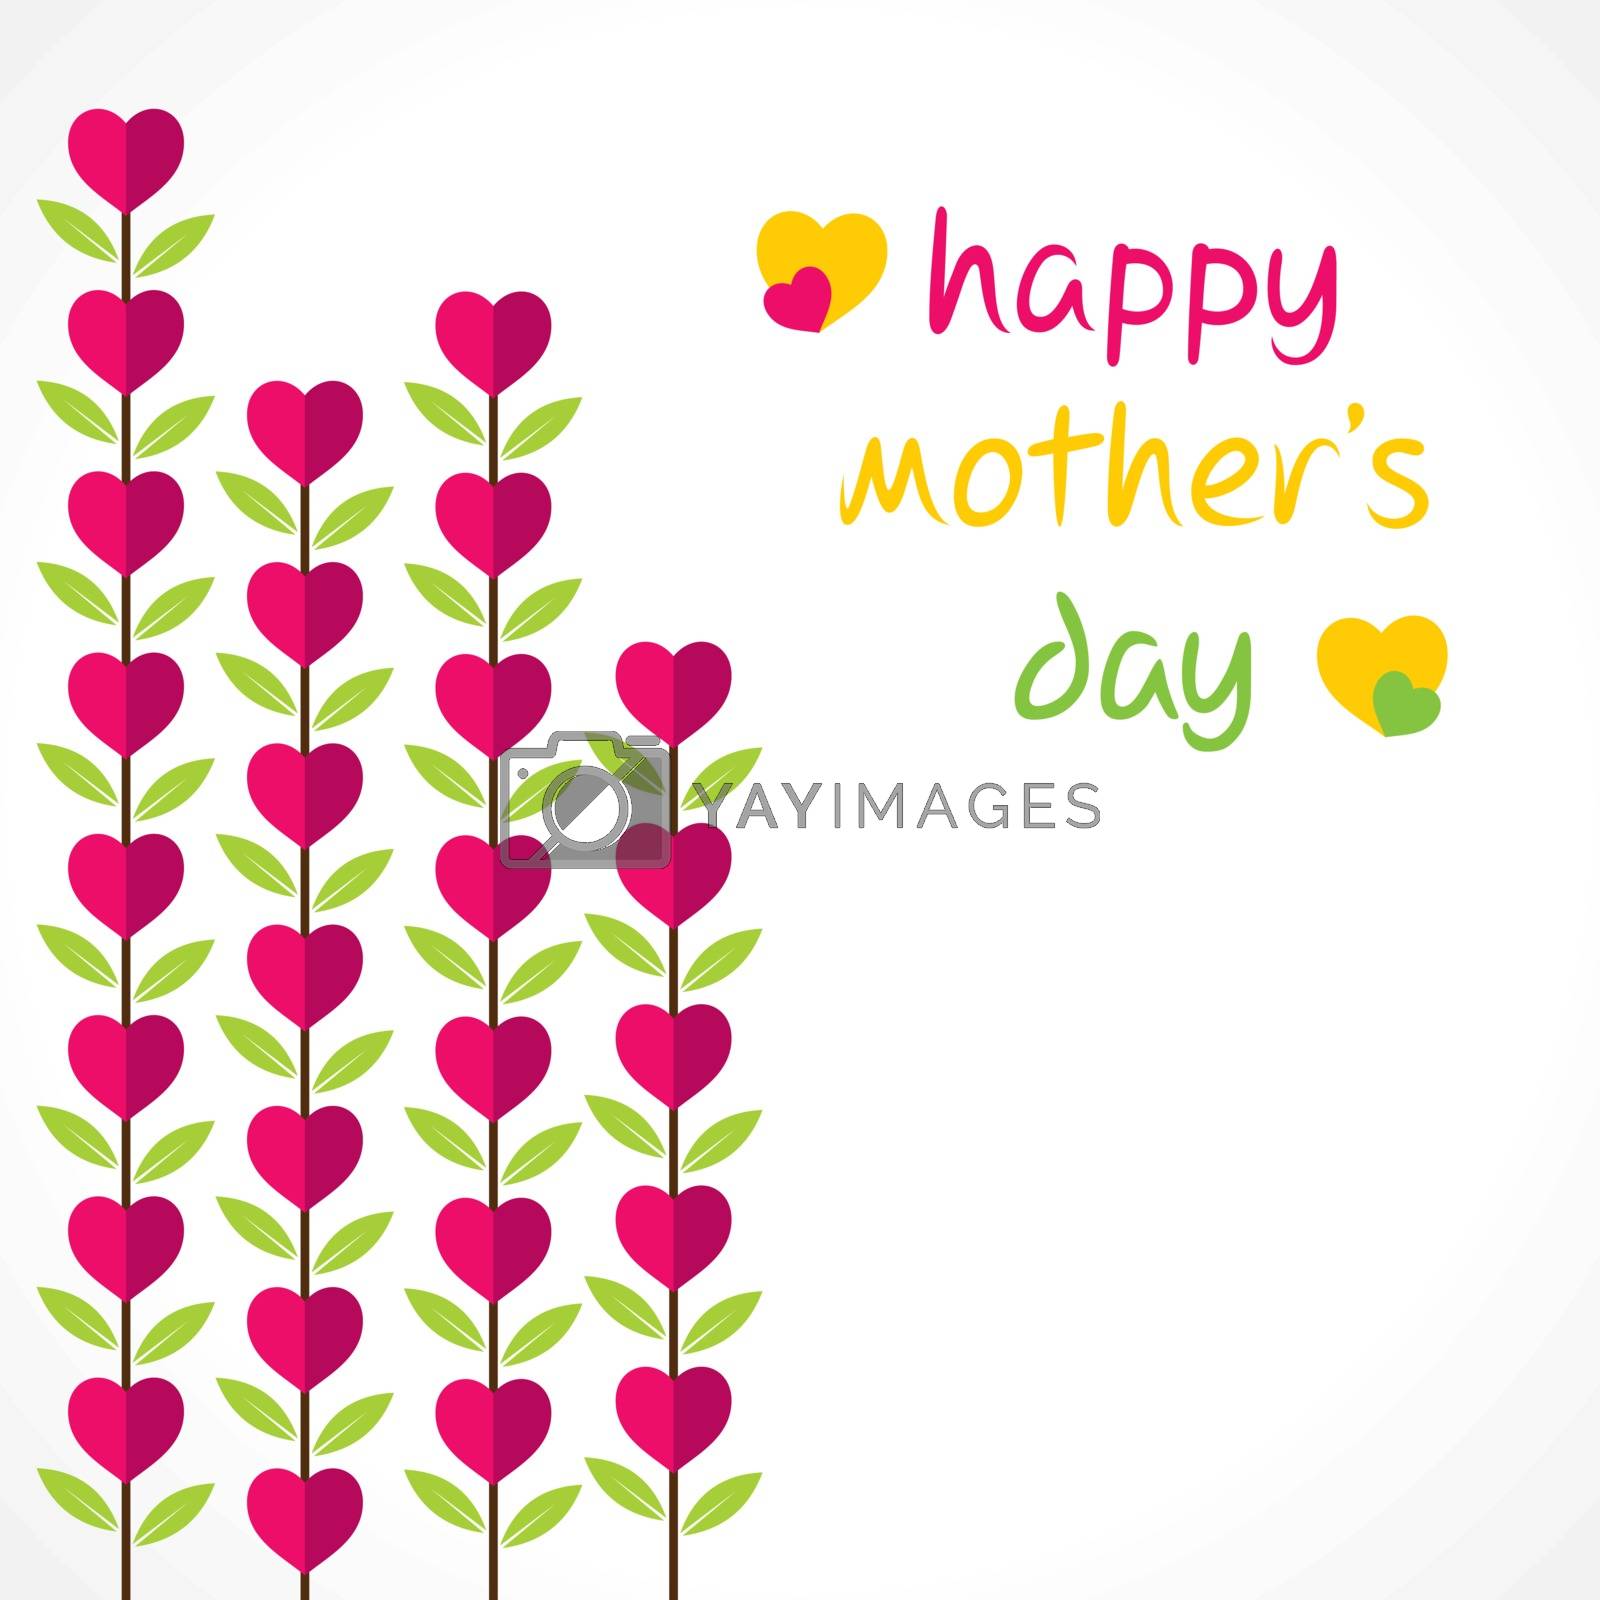 Royalty free image of creative happy mothers day greeting design vector by vectoraart